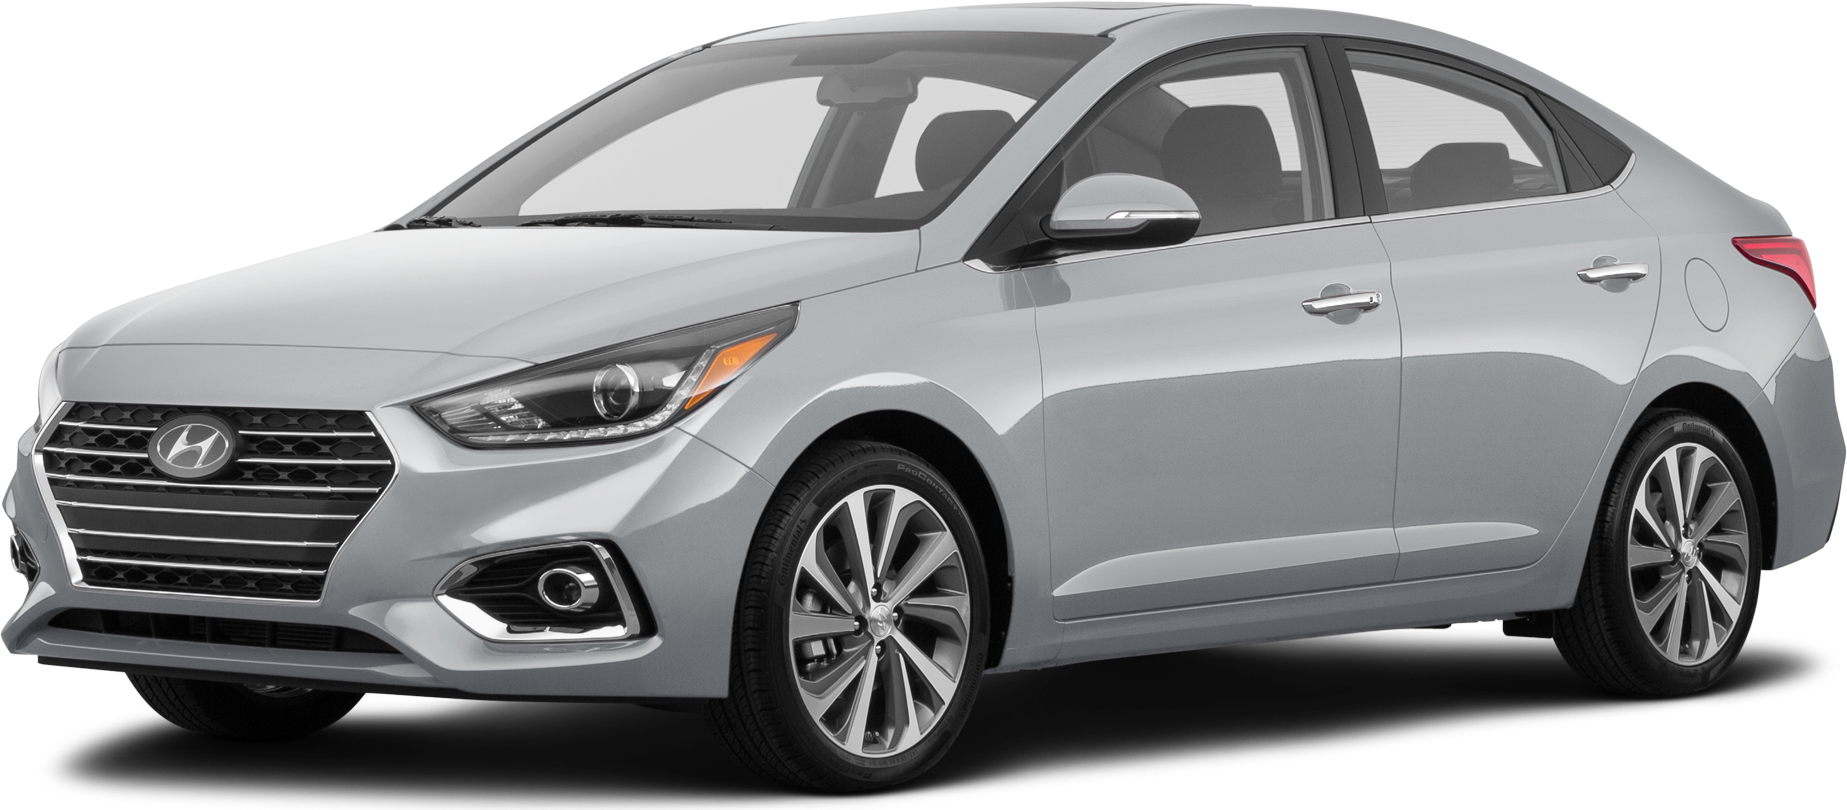 2019 Hyundai Accent Values & Cars for Sale | Kelley Blue Book